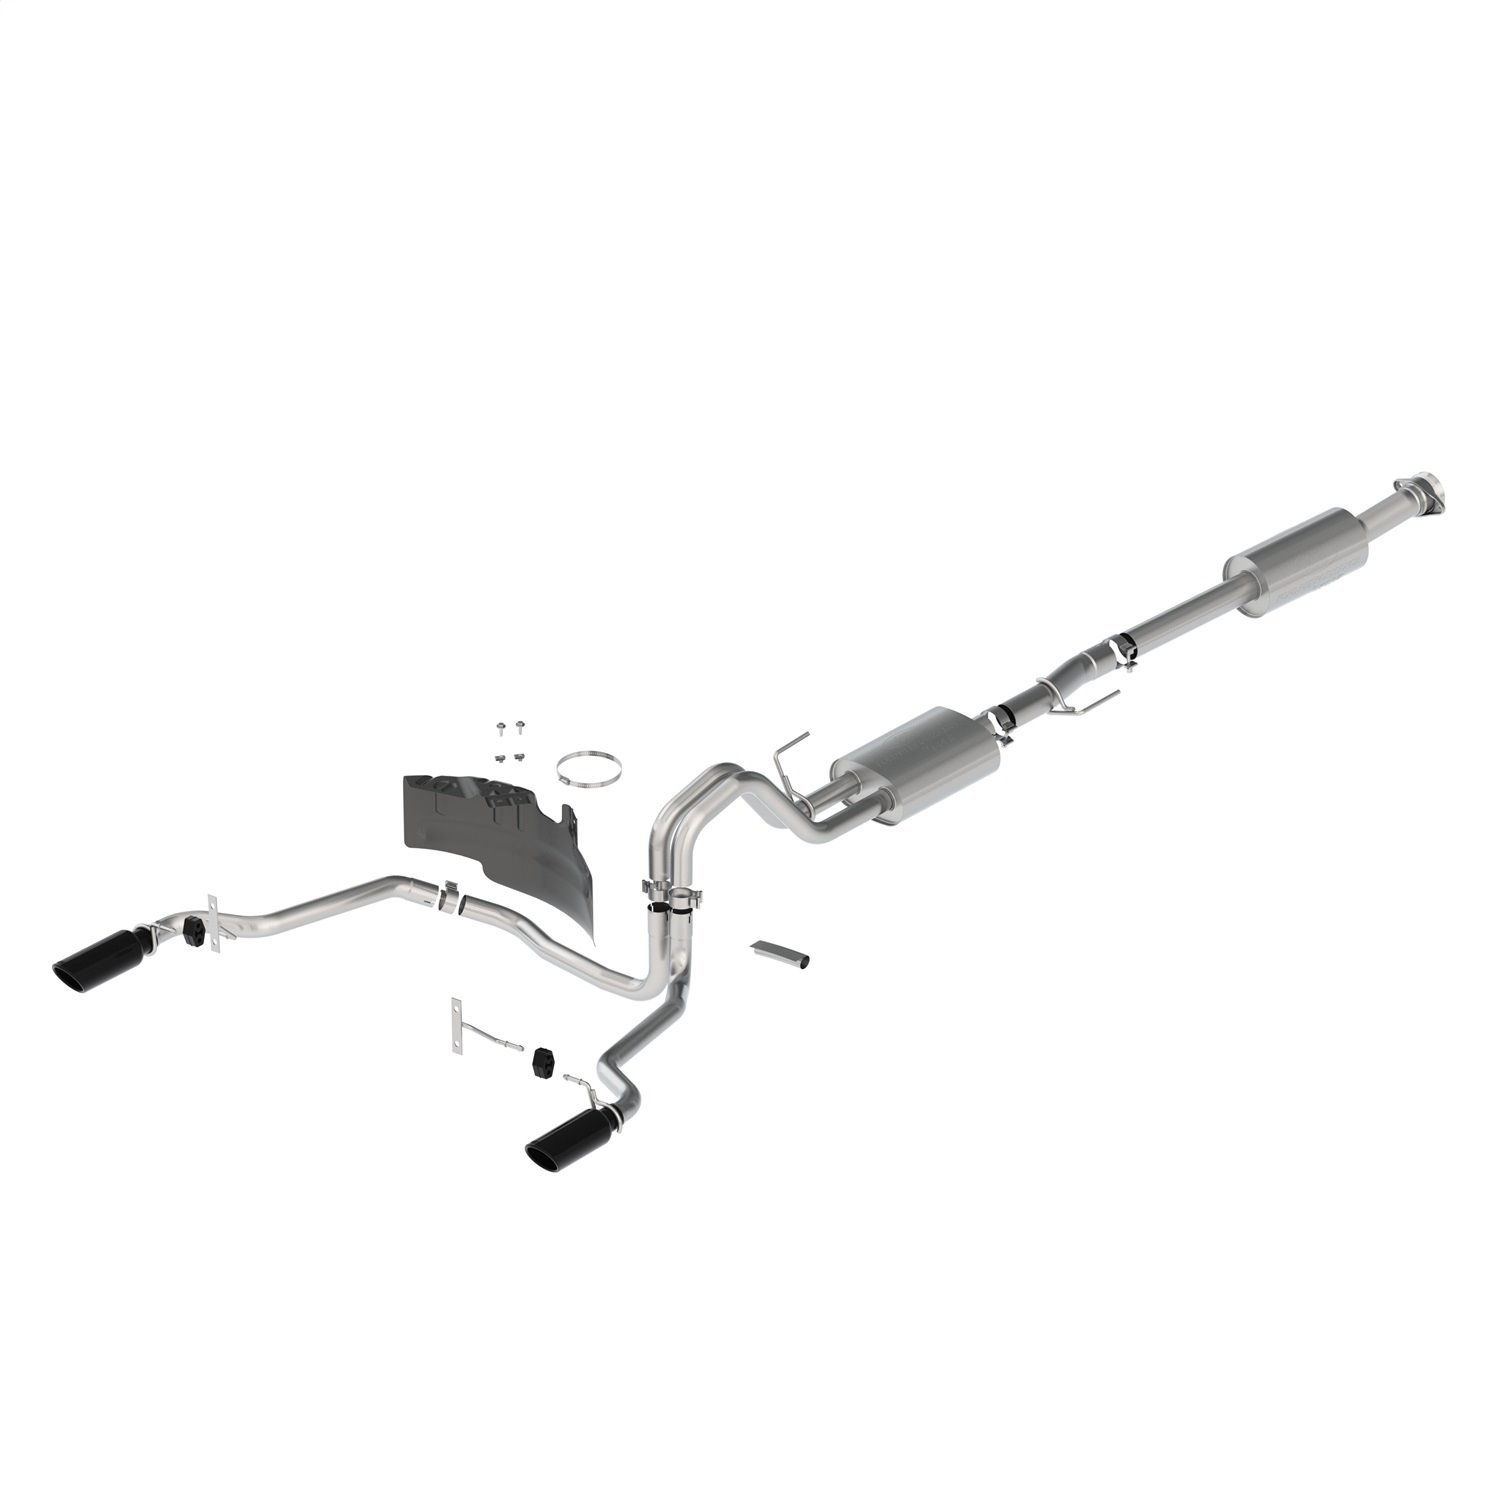 Cat-Back Sport Exhaust System Fits Select Ford F-150